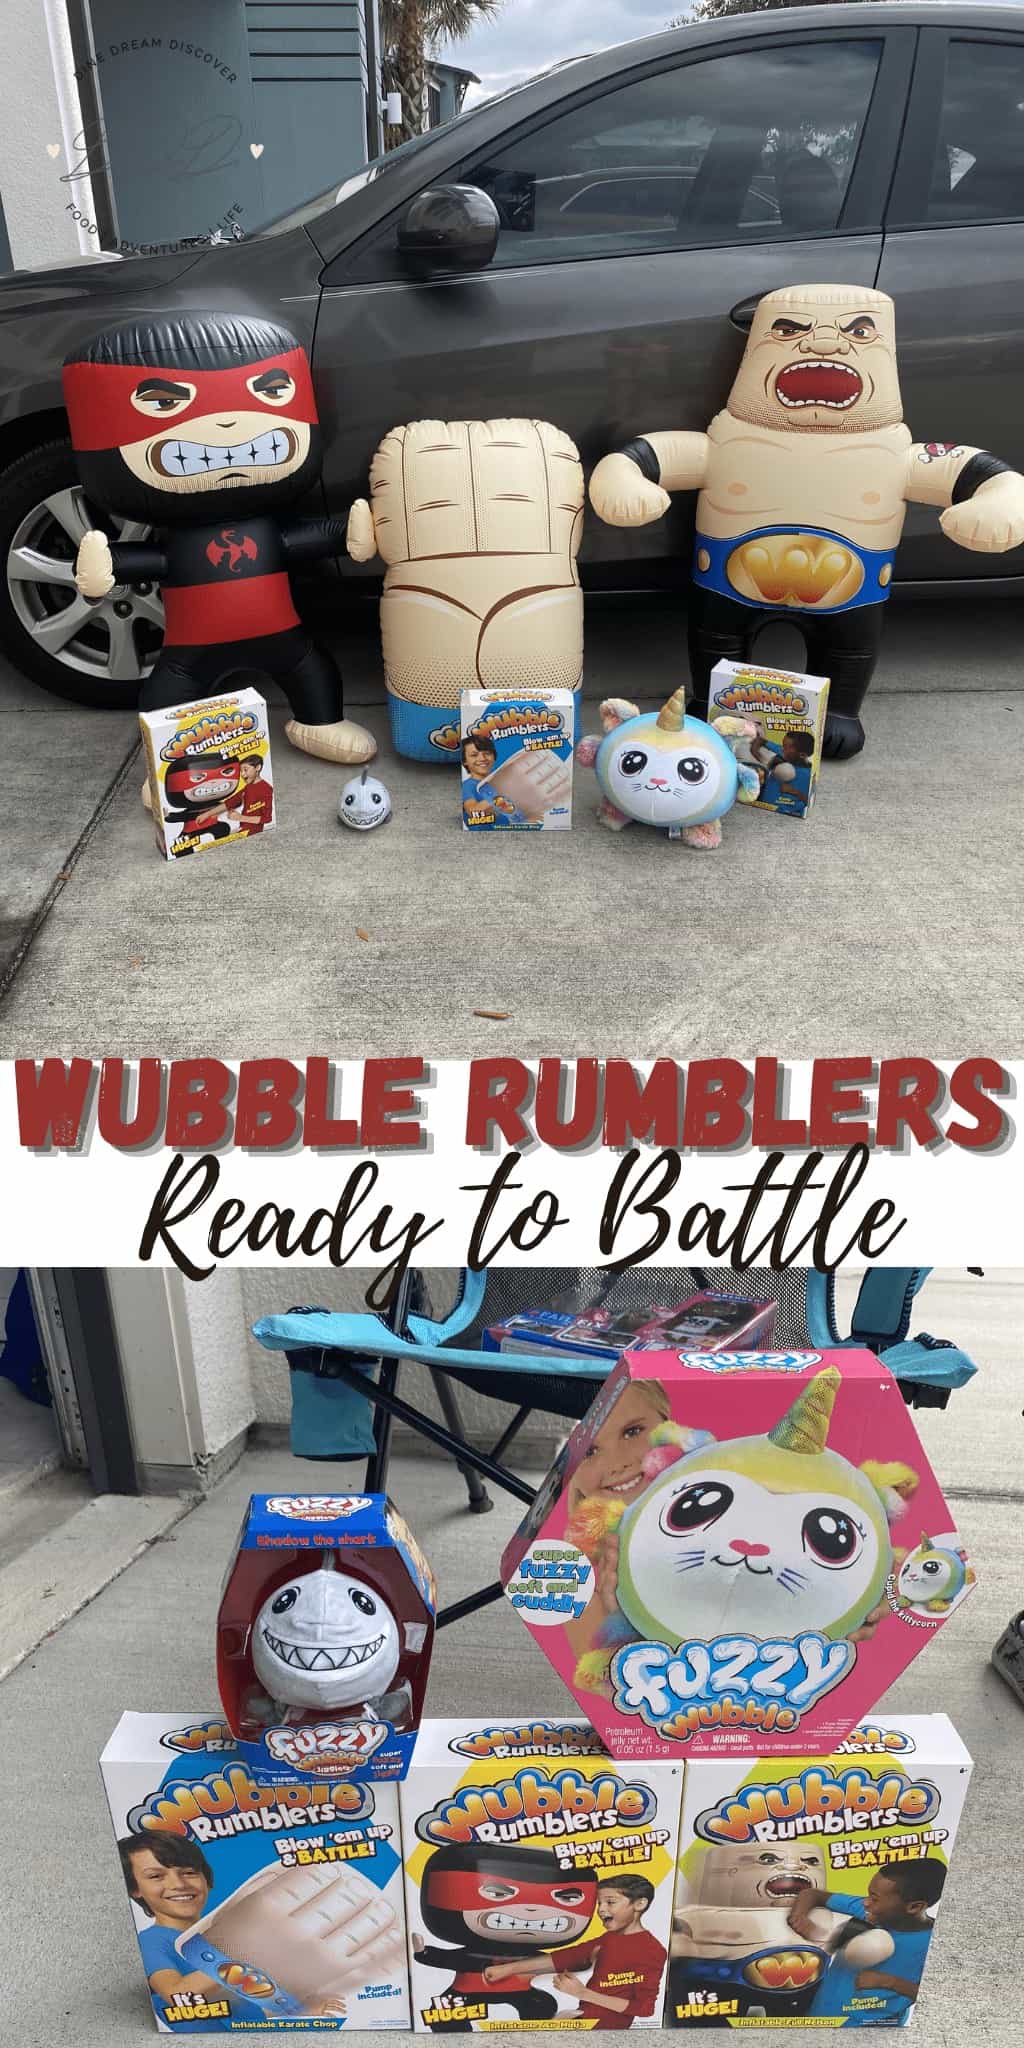 Wubble Rumblers are Ready to Battle